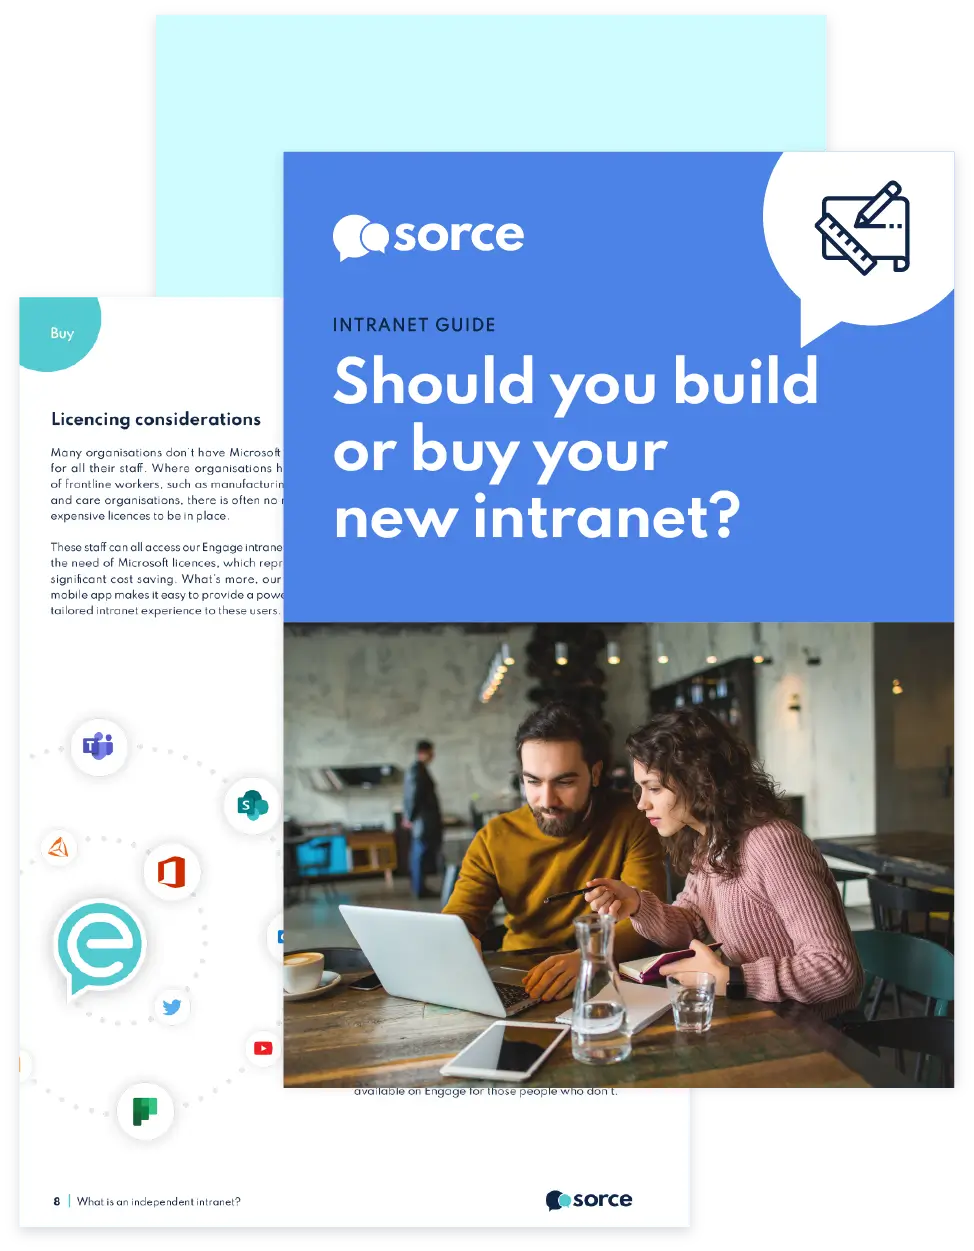 Build or buy your new intranet guide